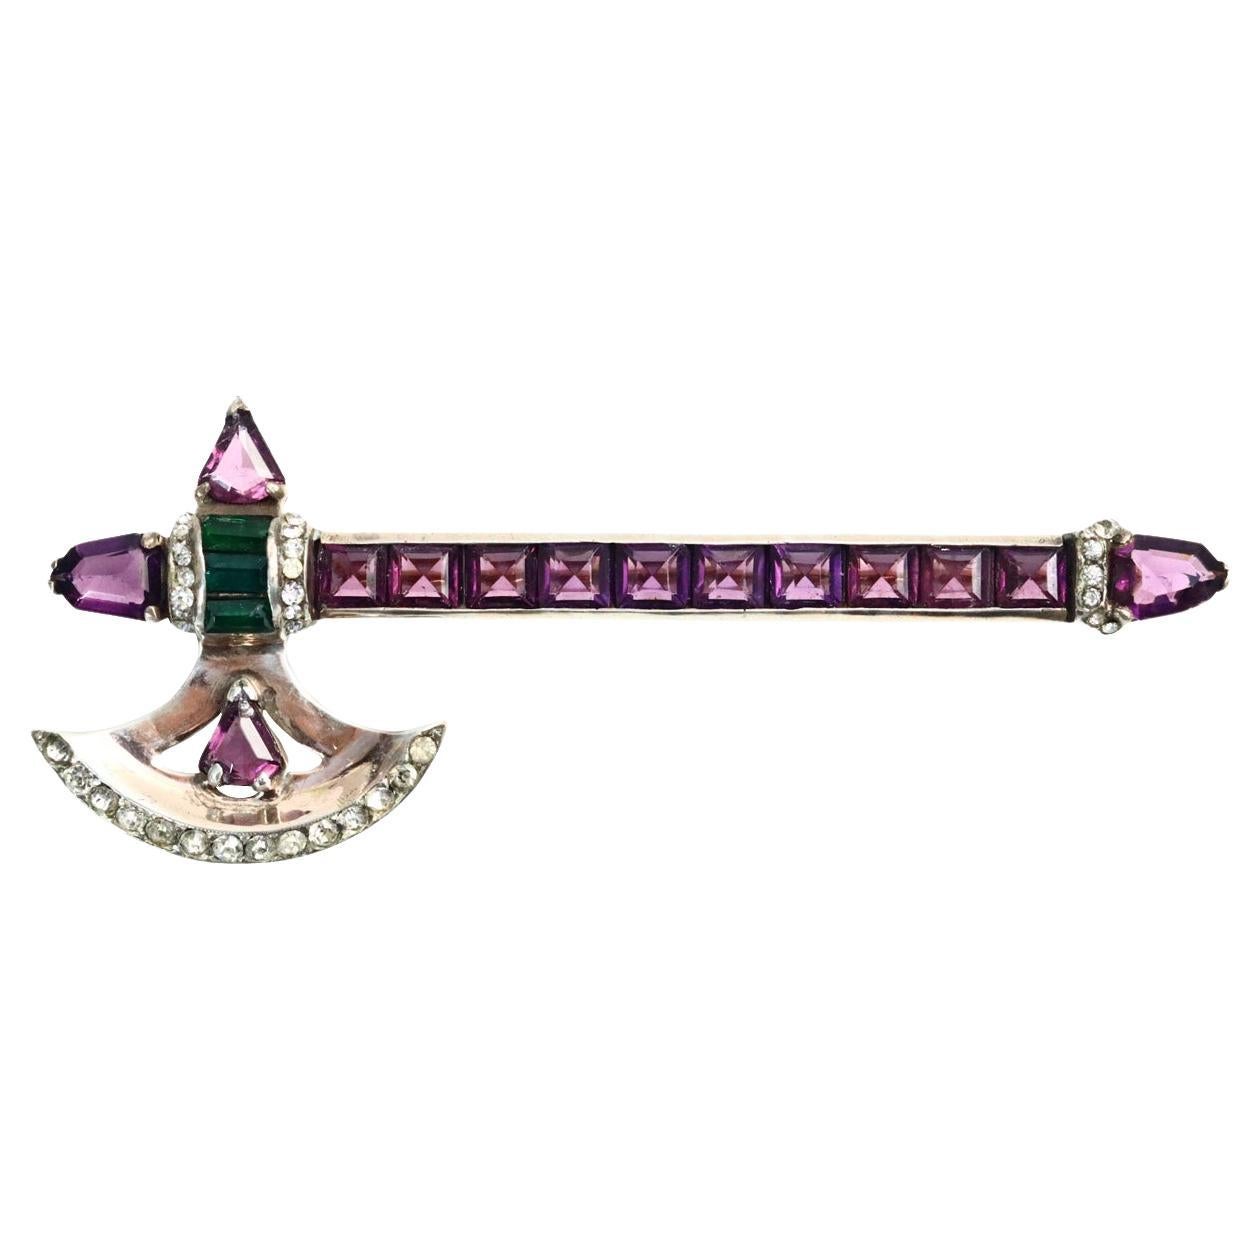 Vintage Sterling Hatchet Brooch with Amethyst, Circa 1940s Emerald and Diamante